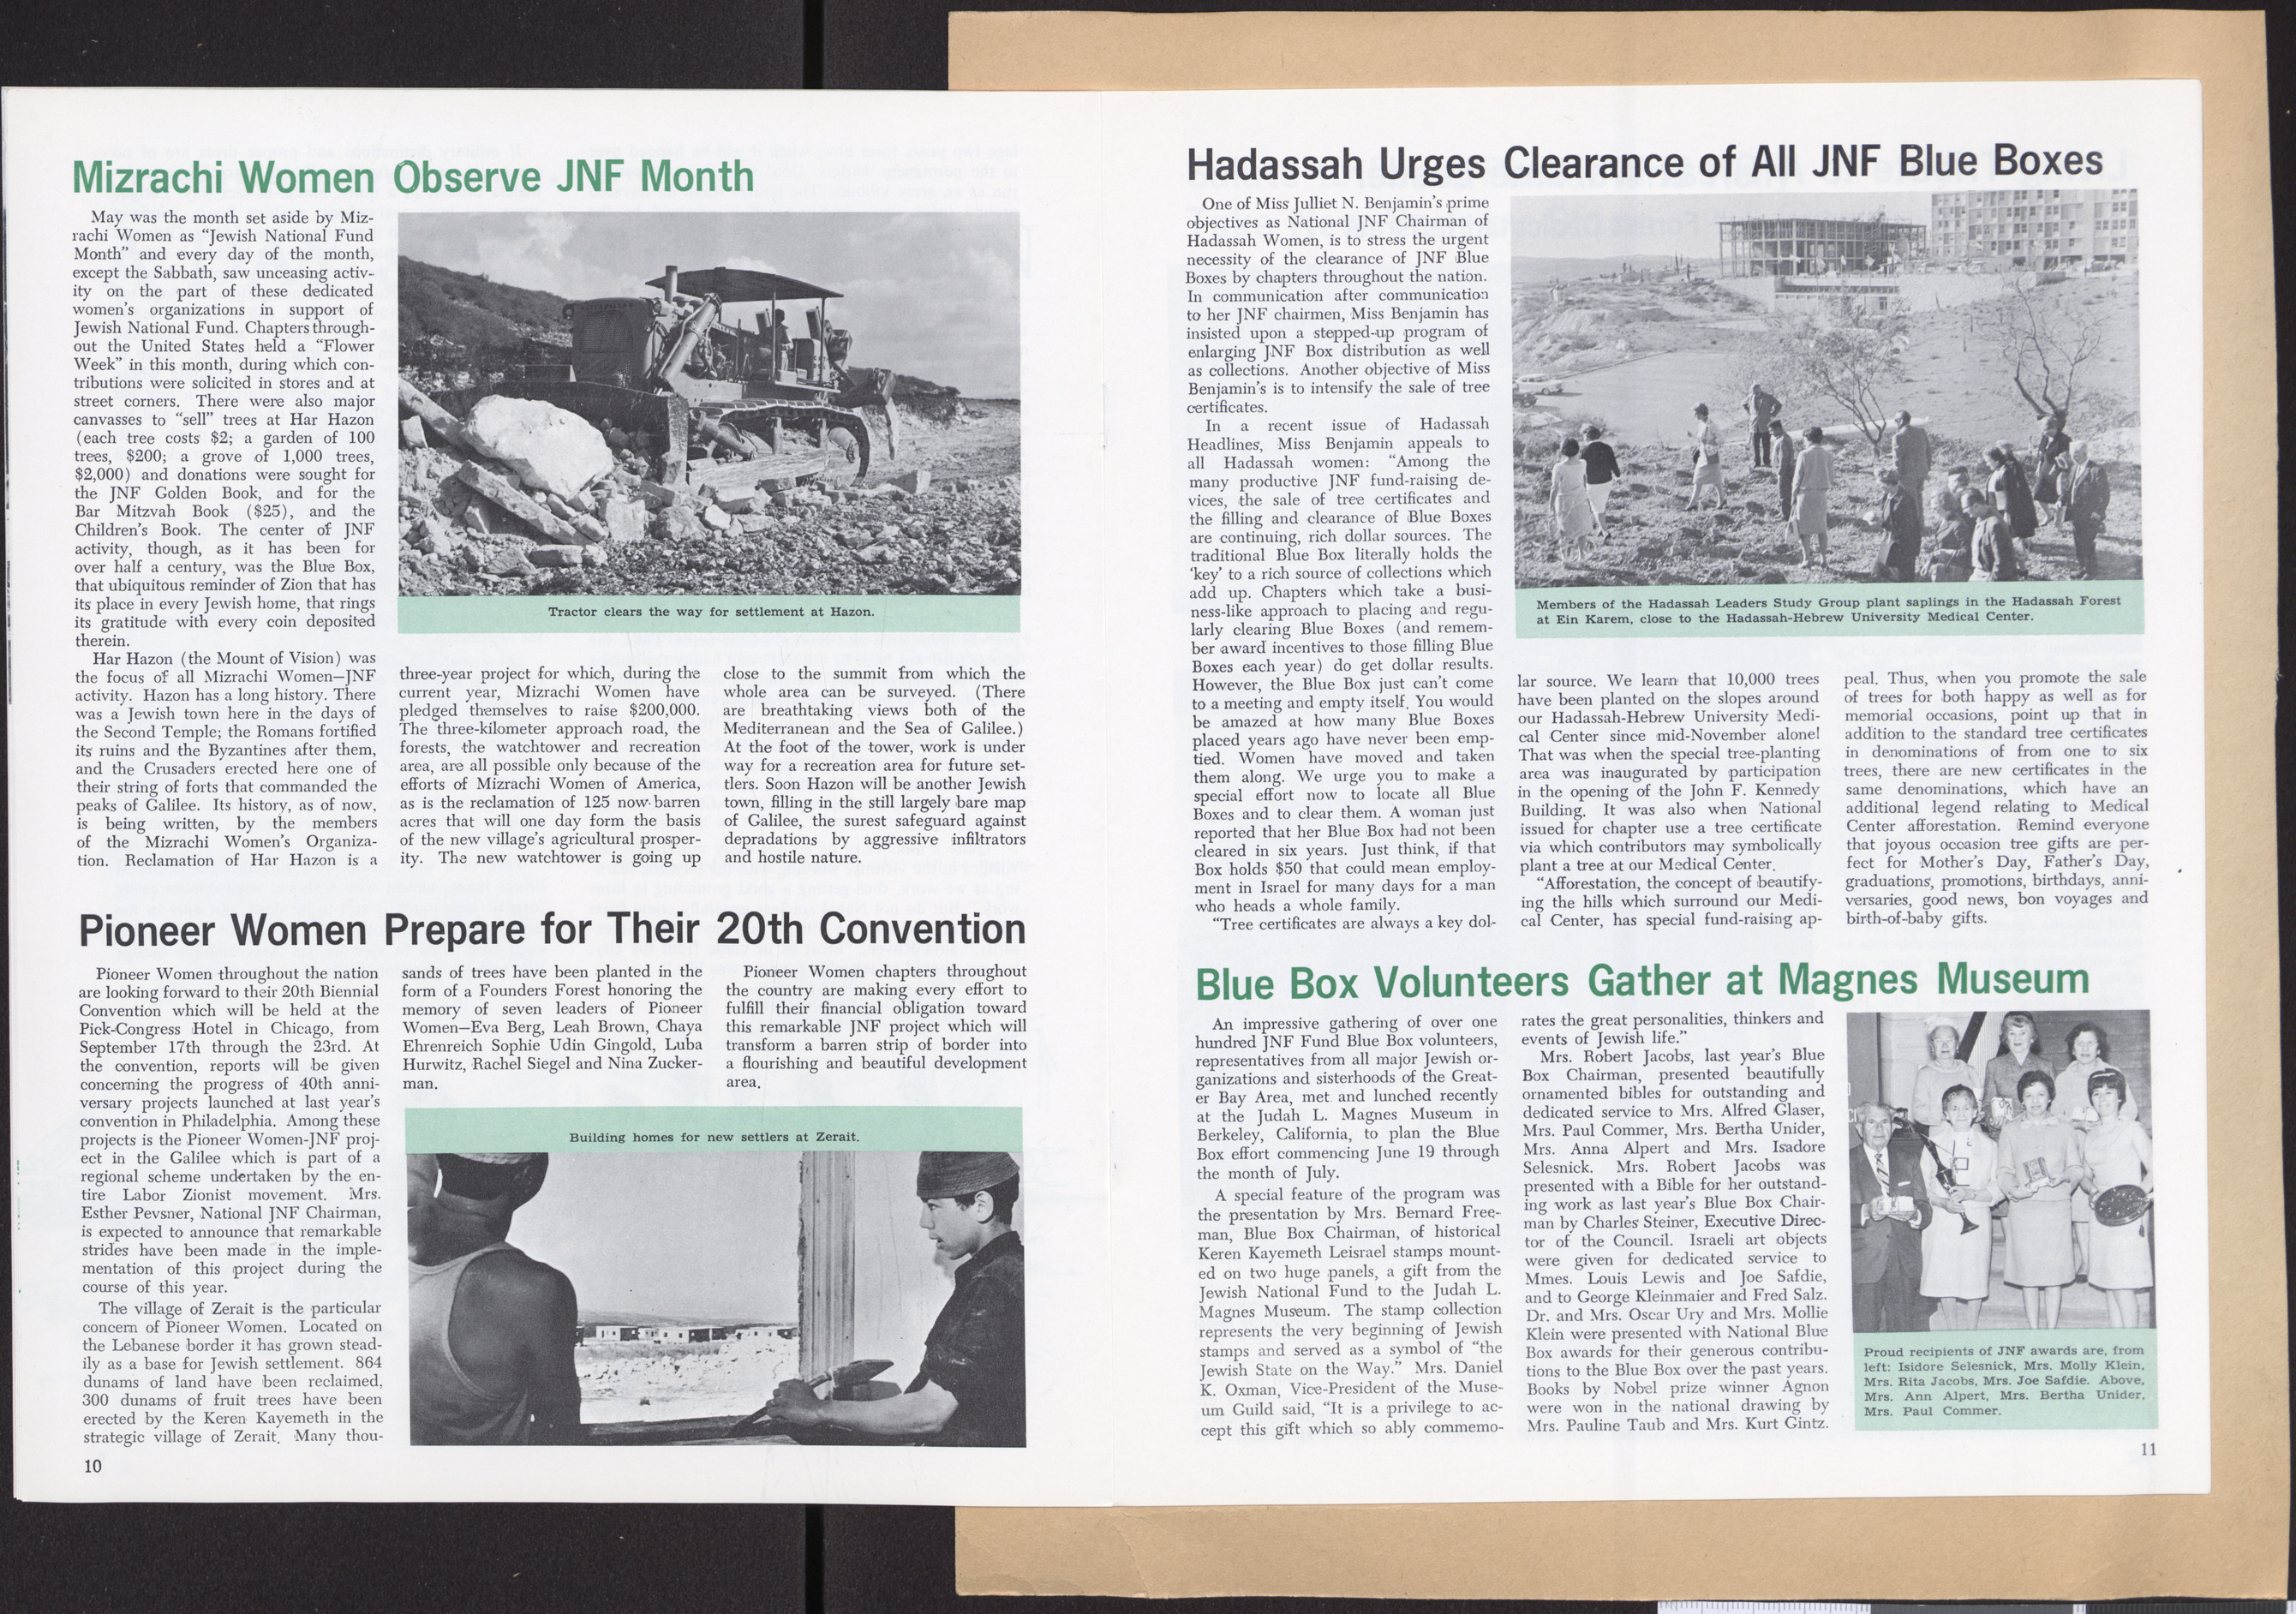 Magazine, Land and Life, Vol. XXII, No. 5, Summer 1967, pages 10-11